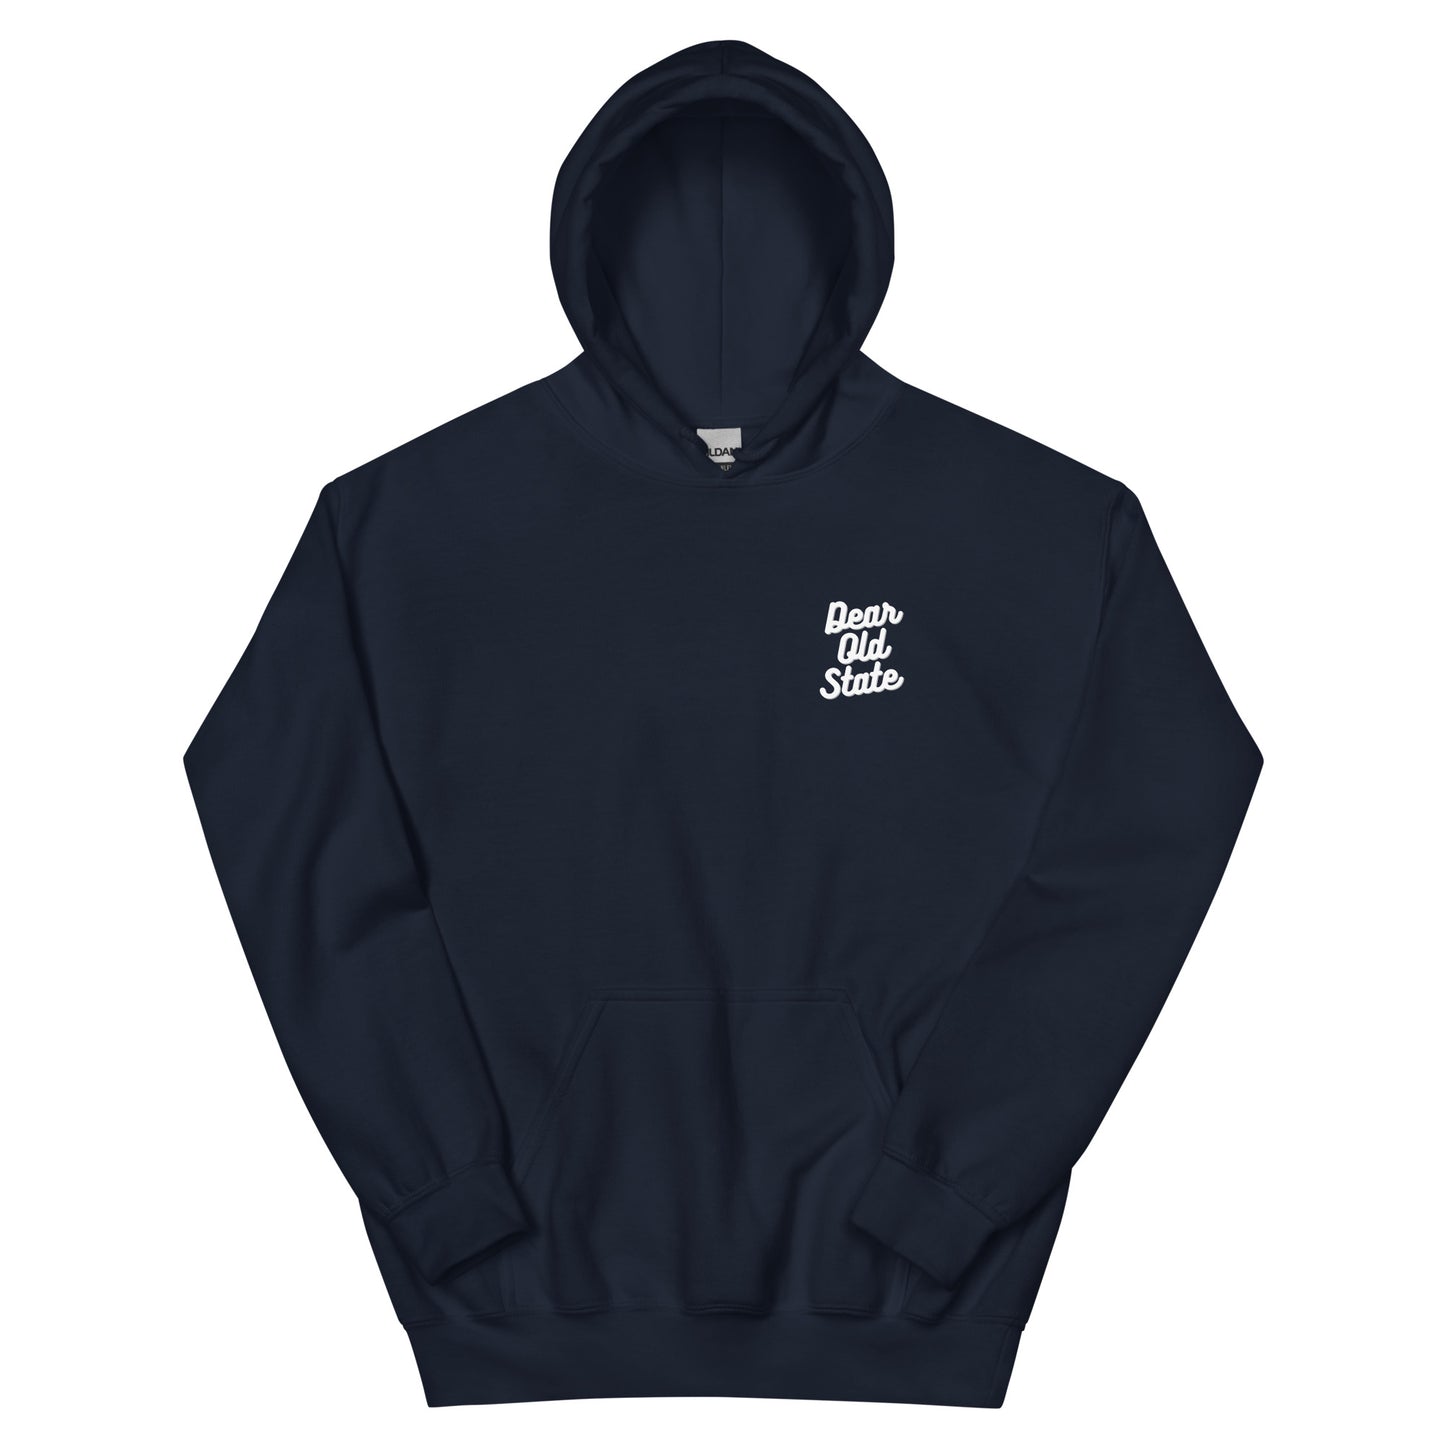 "It's always sunny at the happy valley" Hoodie